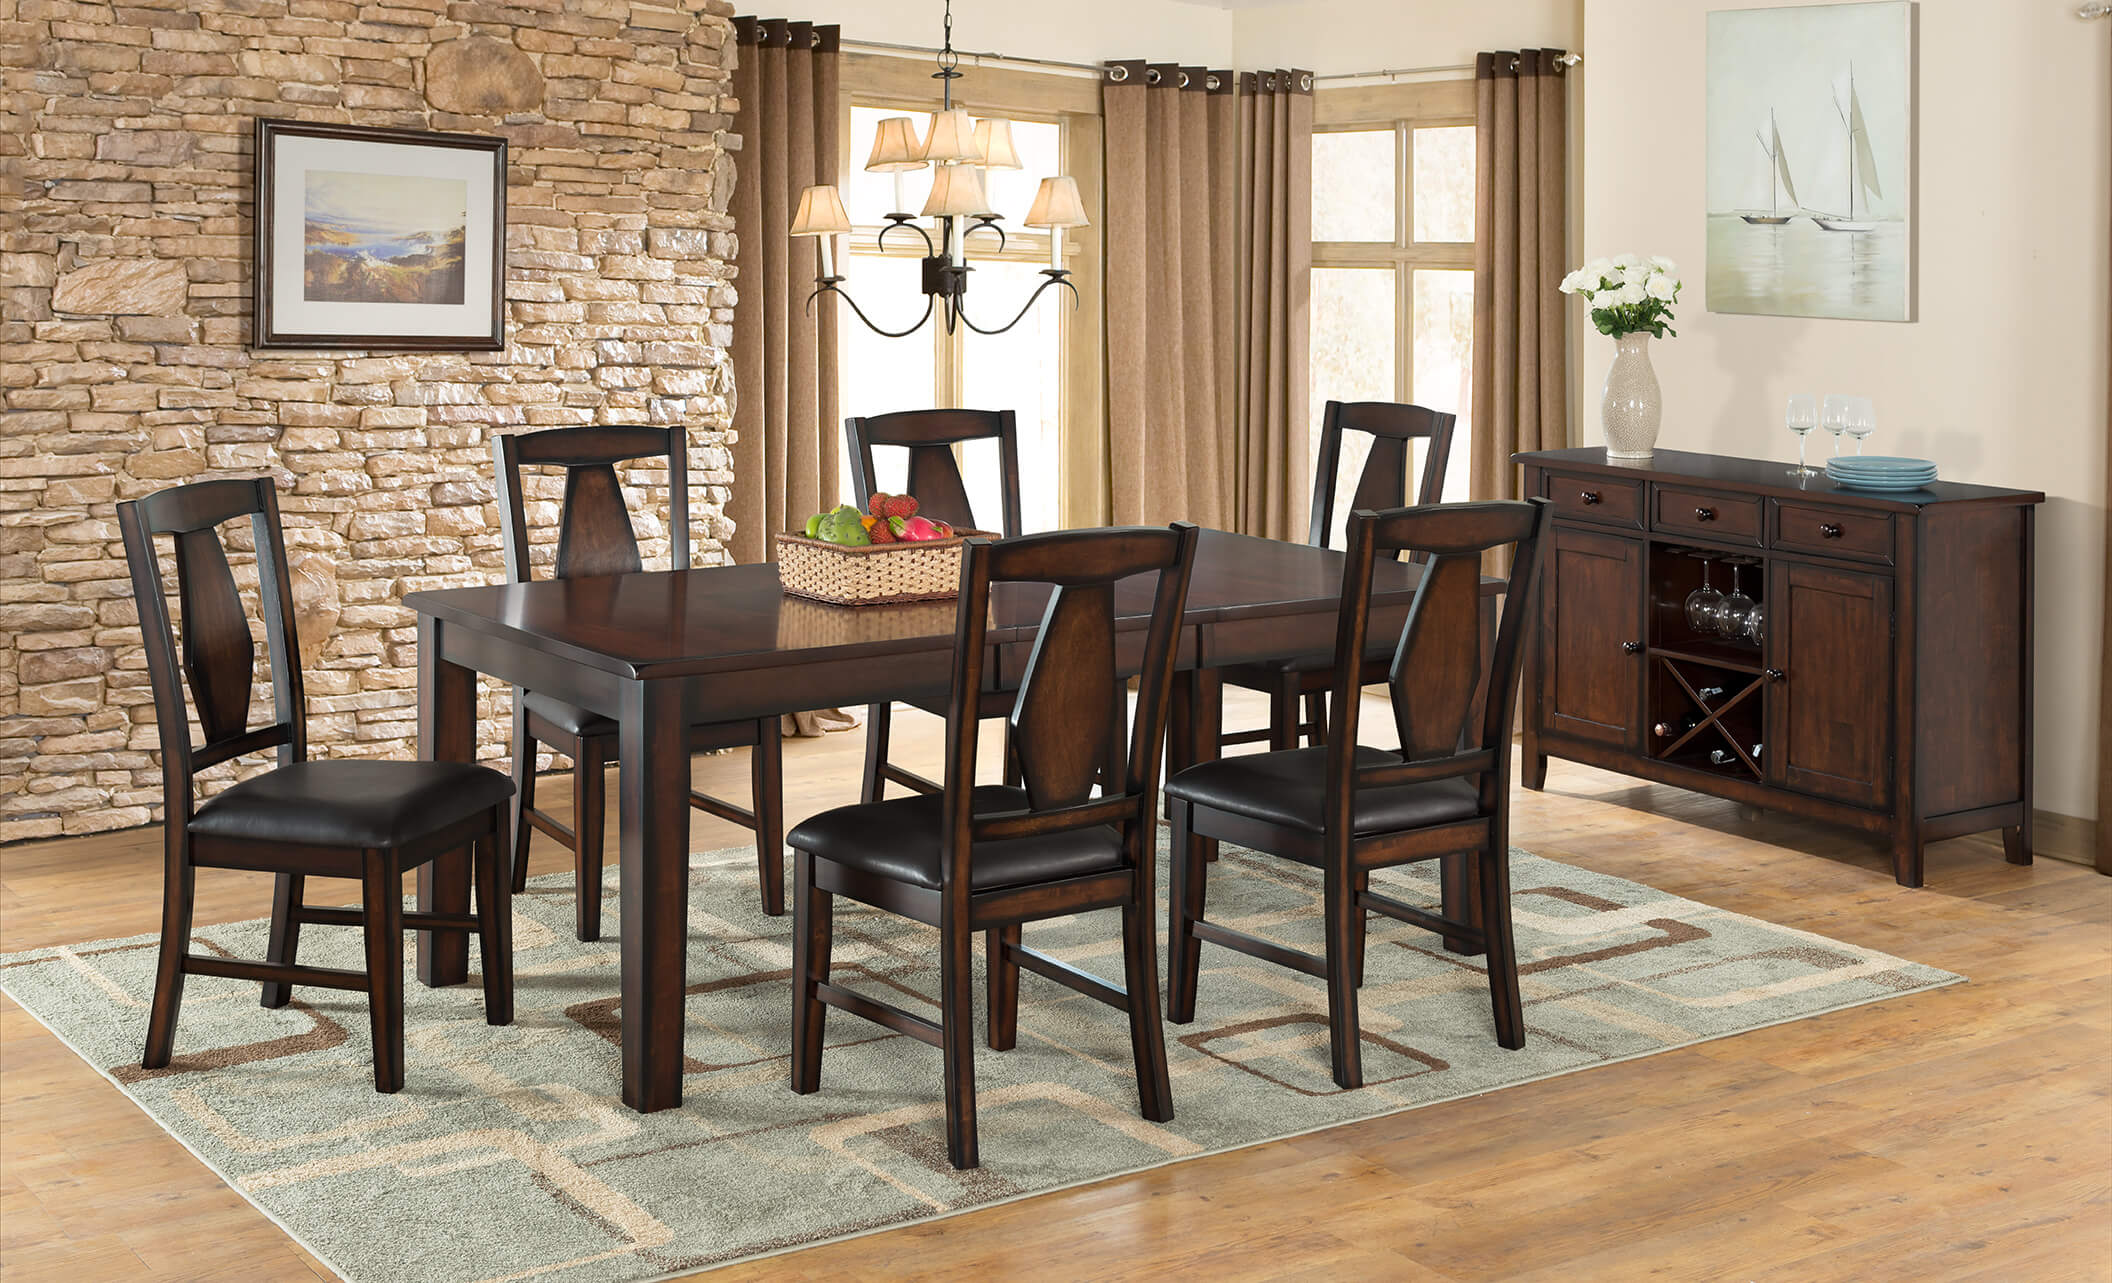 Tuscan Hills 7 Piece Dining Set by Vilo Home - Casa Leaders Inc.